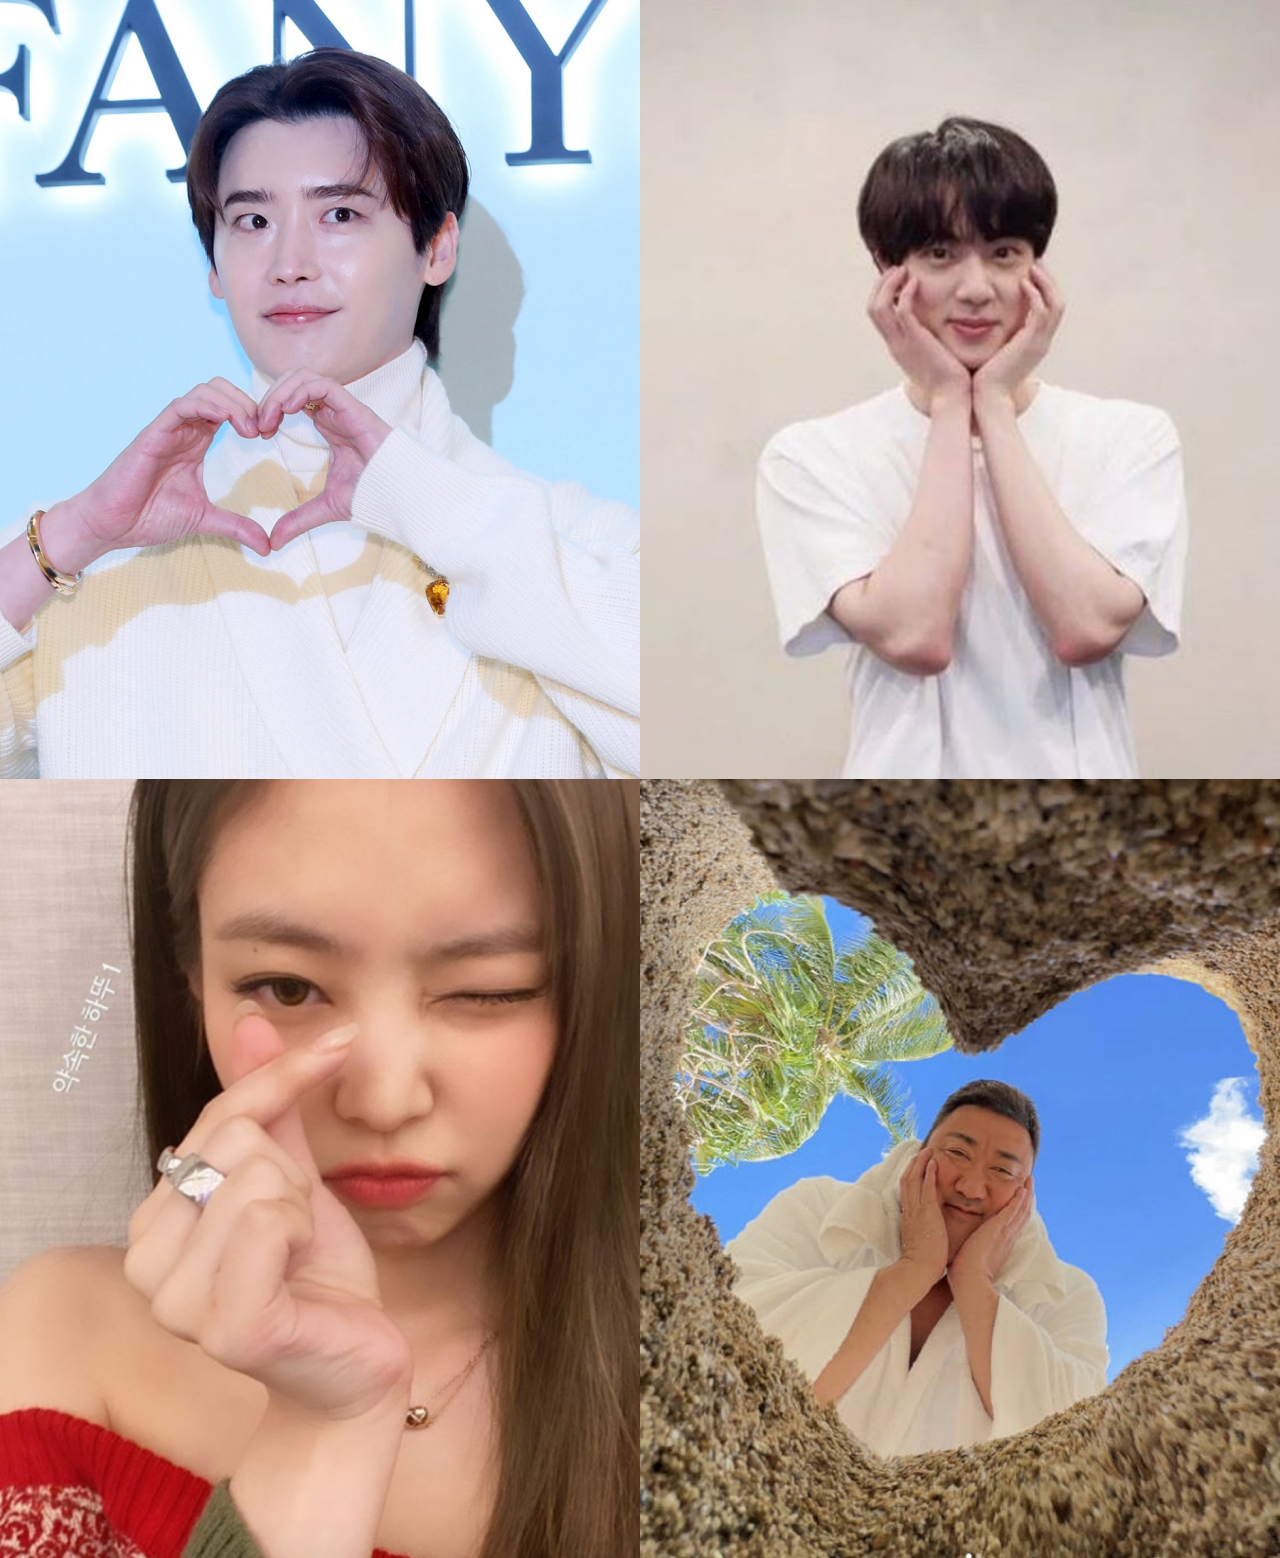 Clockwise from top left: Actor Lee Jong-suk, Jin from boyband BTS, actor Ma Dong-seok and Jennie from Blackpink (Newsis, Instagram of Jin, Ma Dong-seok and Jennie)